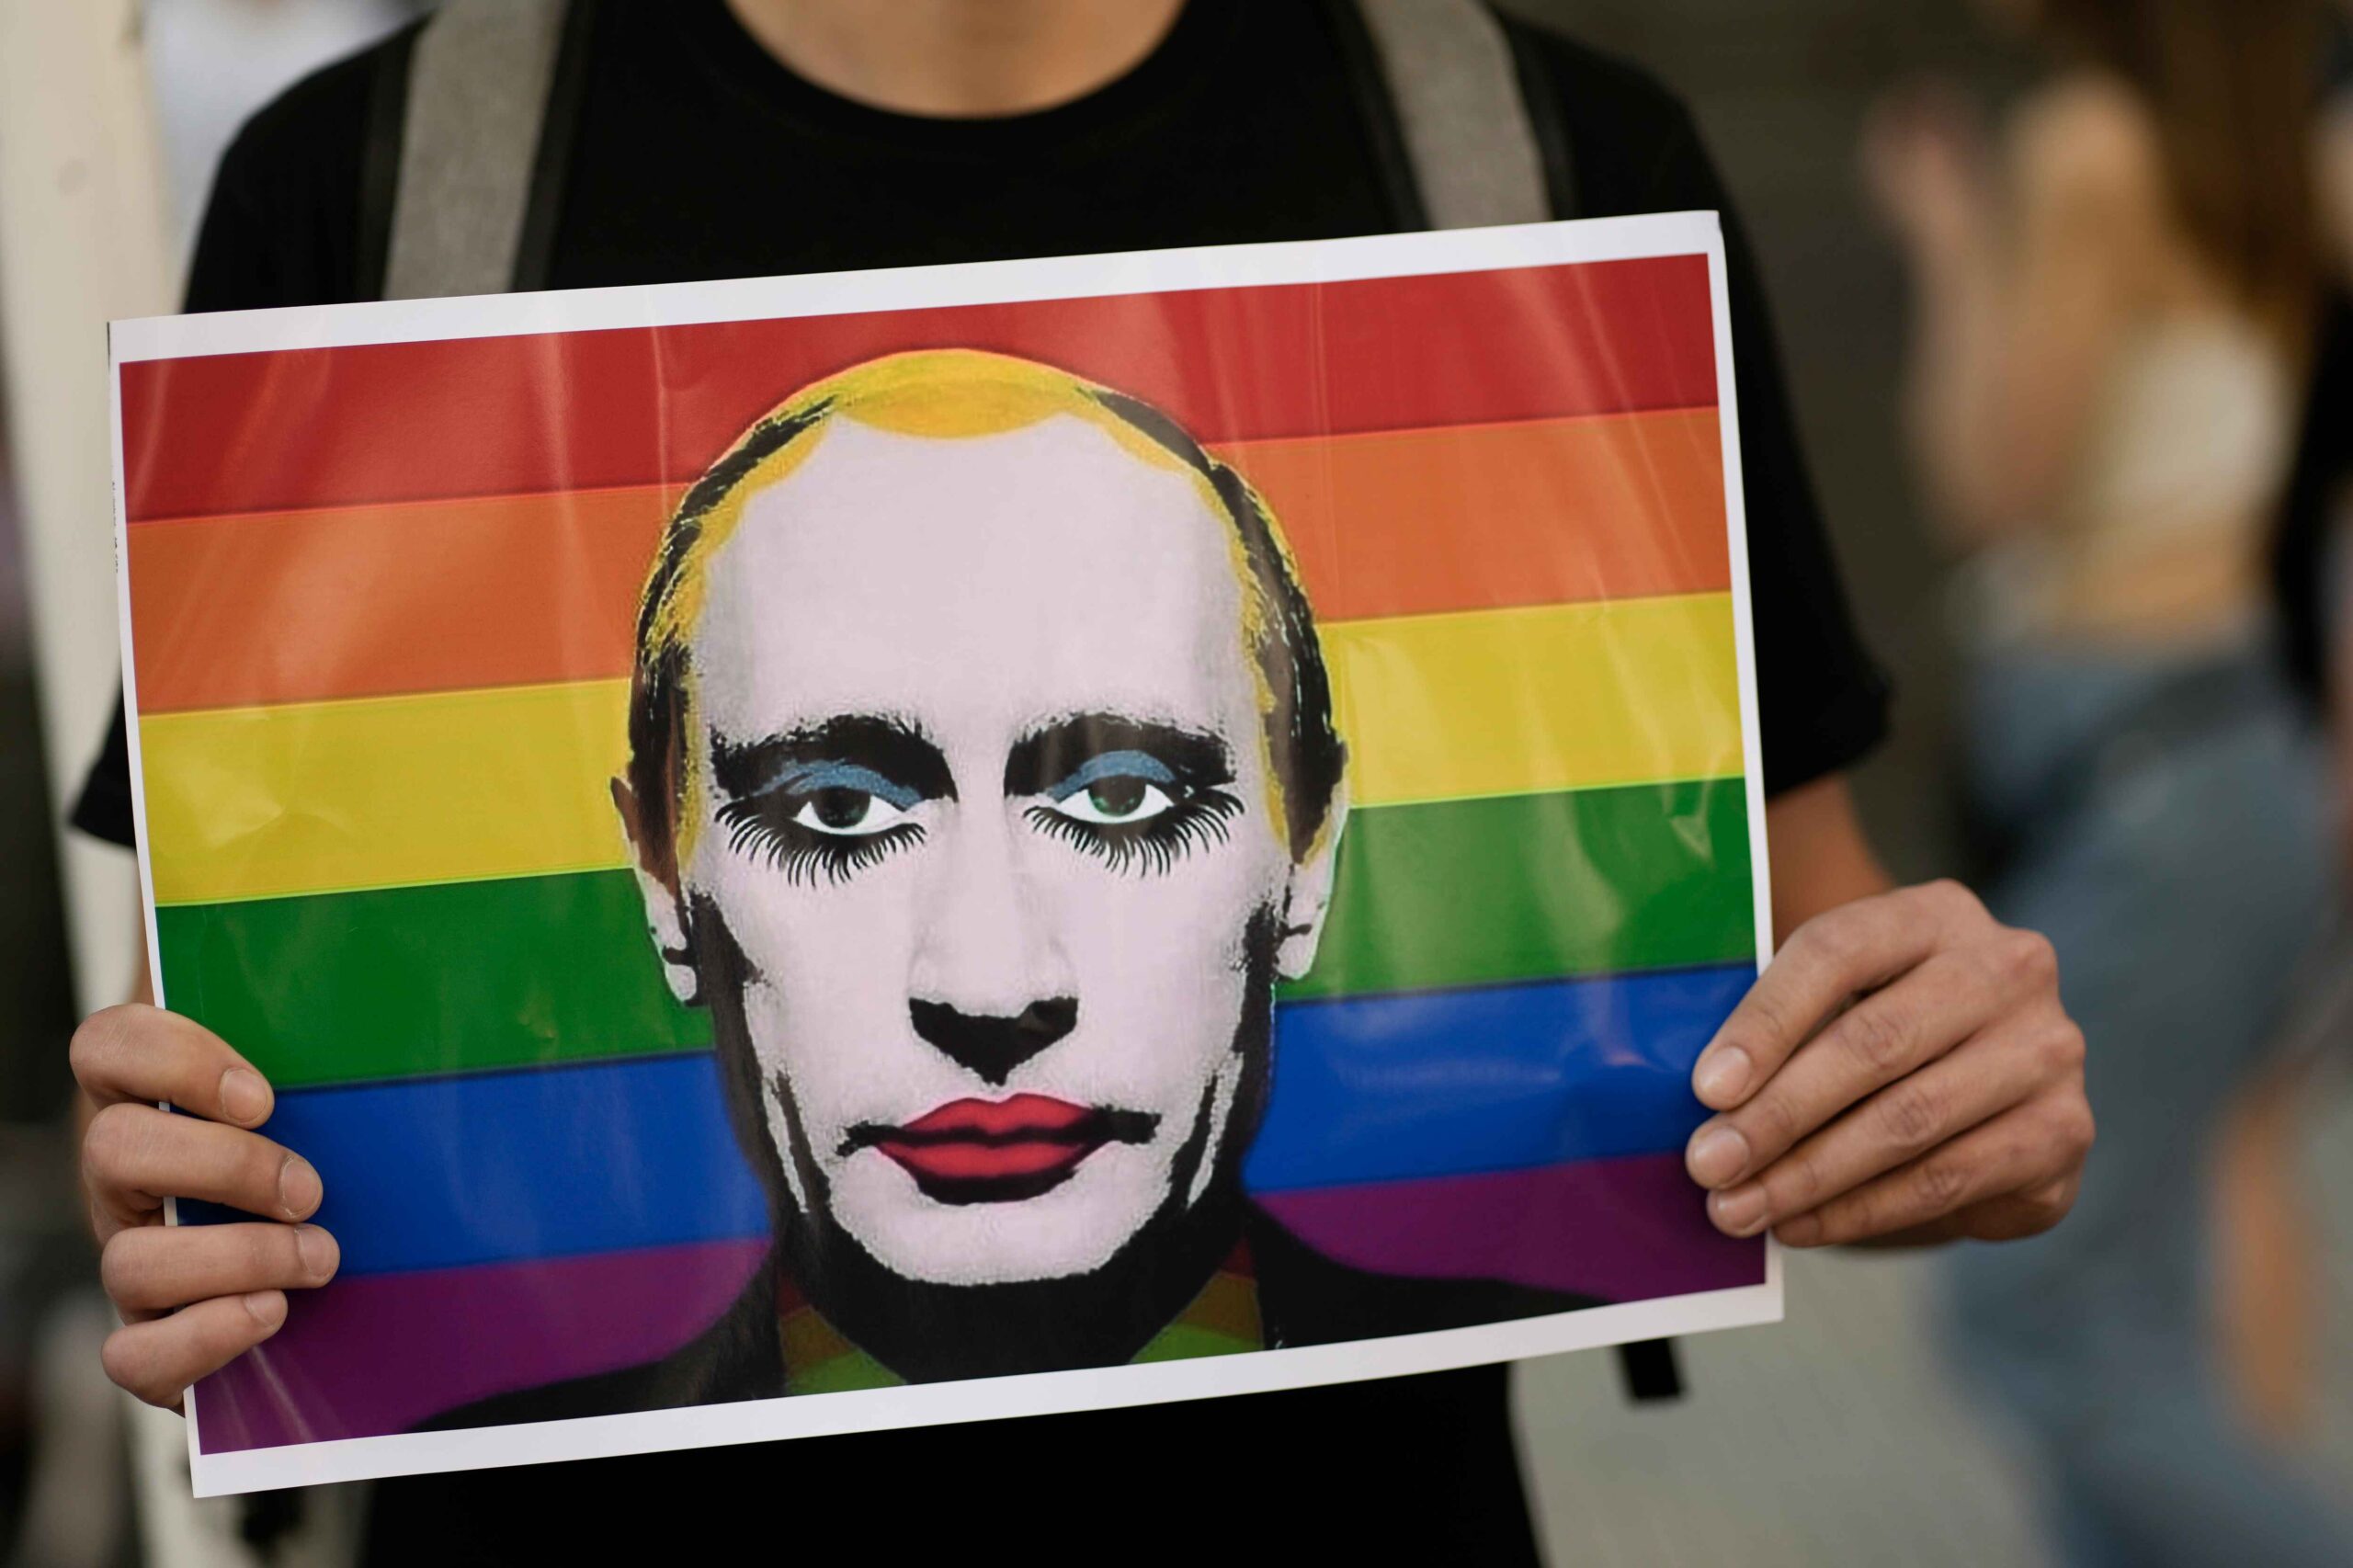 The Supreme Court of Russia will decide whether to ban the “international LGBT public movement” as an extremist threat to Putin's socially conservative agenda. (AP Photo/Rodrigo Abd)